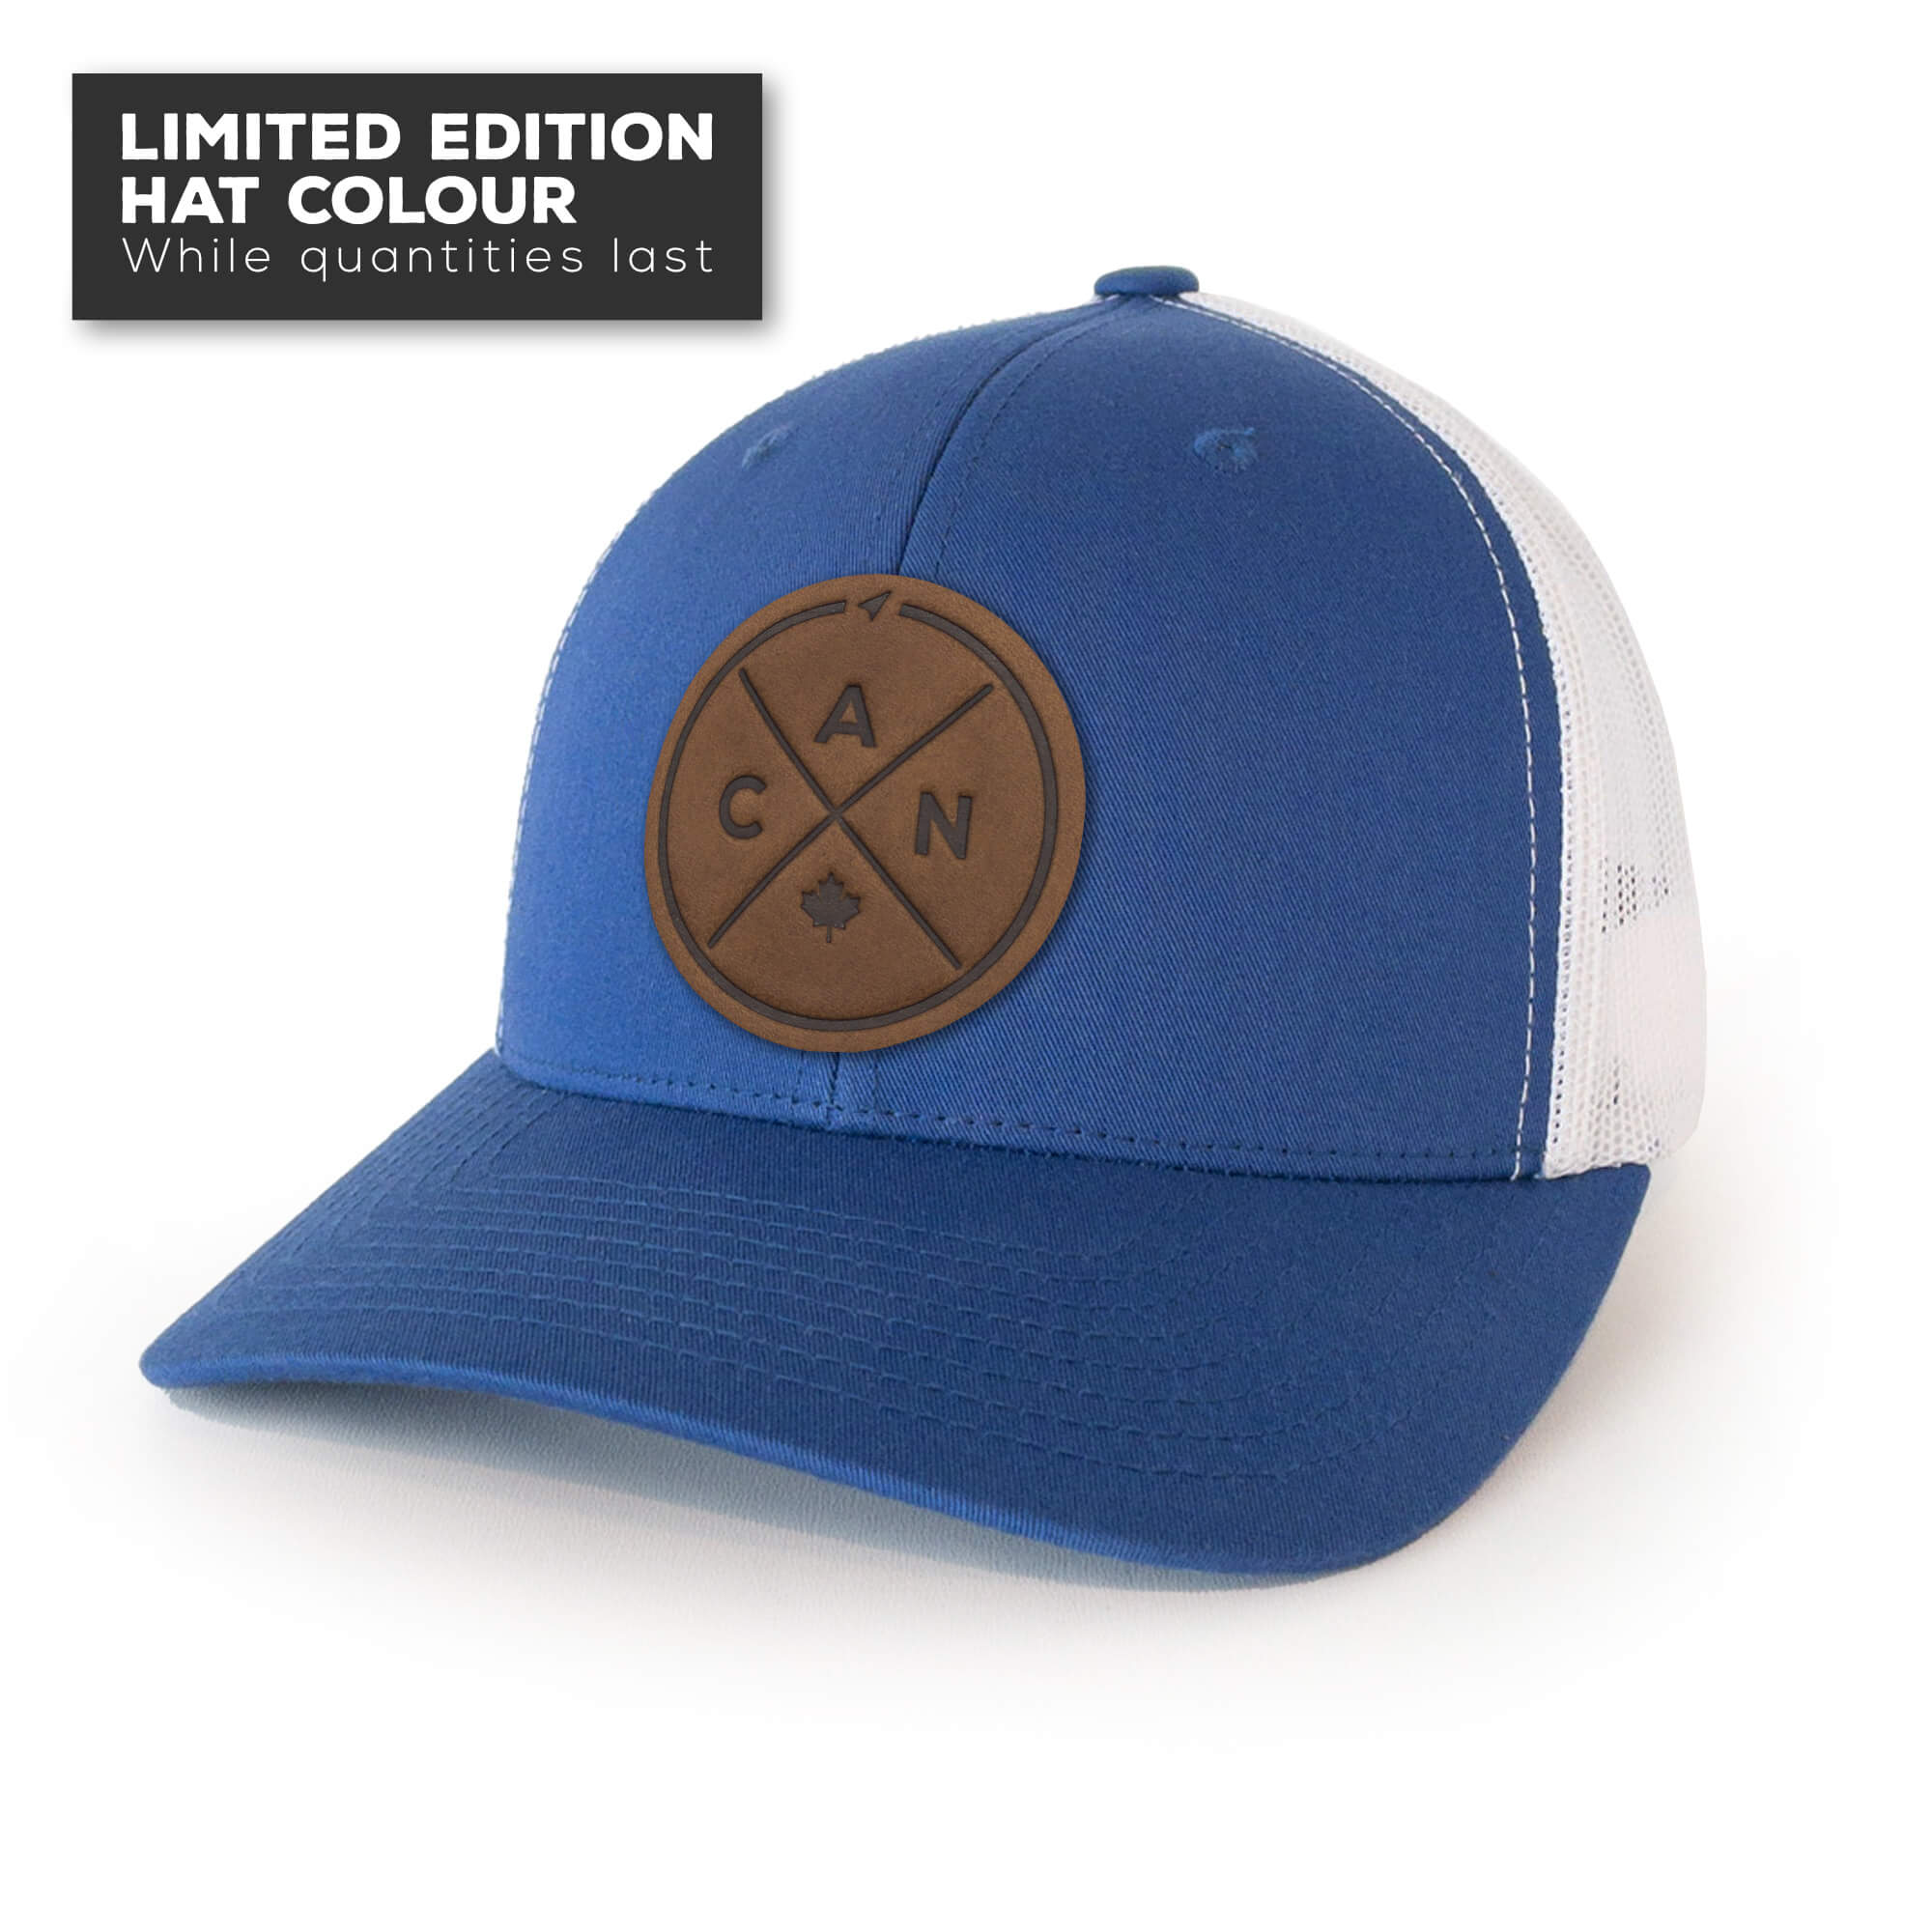 Royal Blue trucker hat with full-grain leather patch of Canada Compass